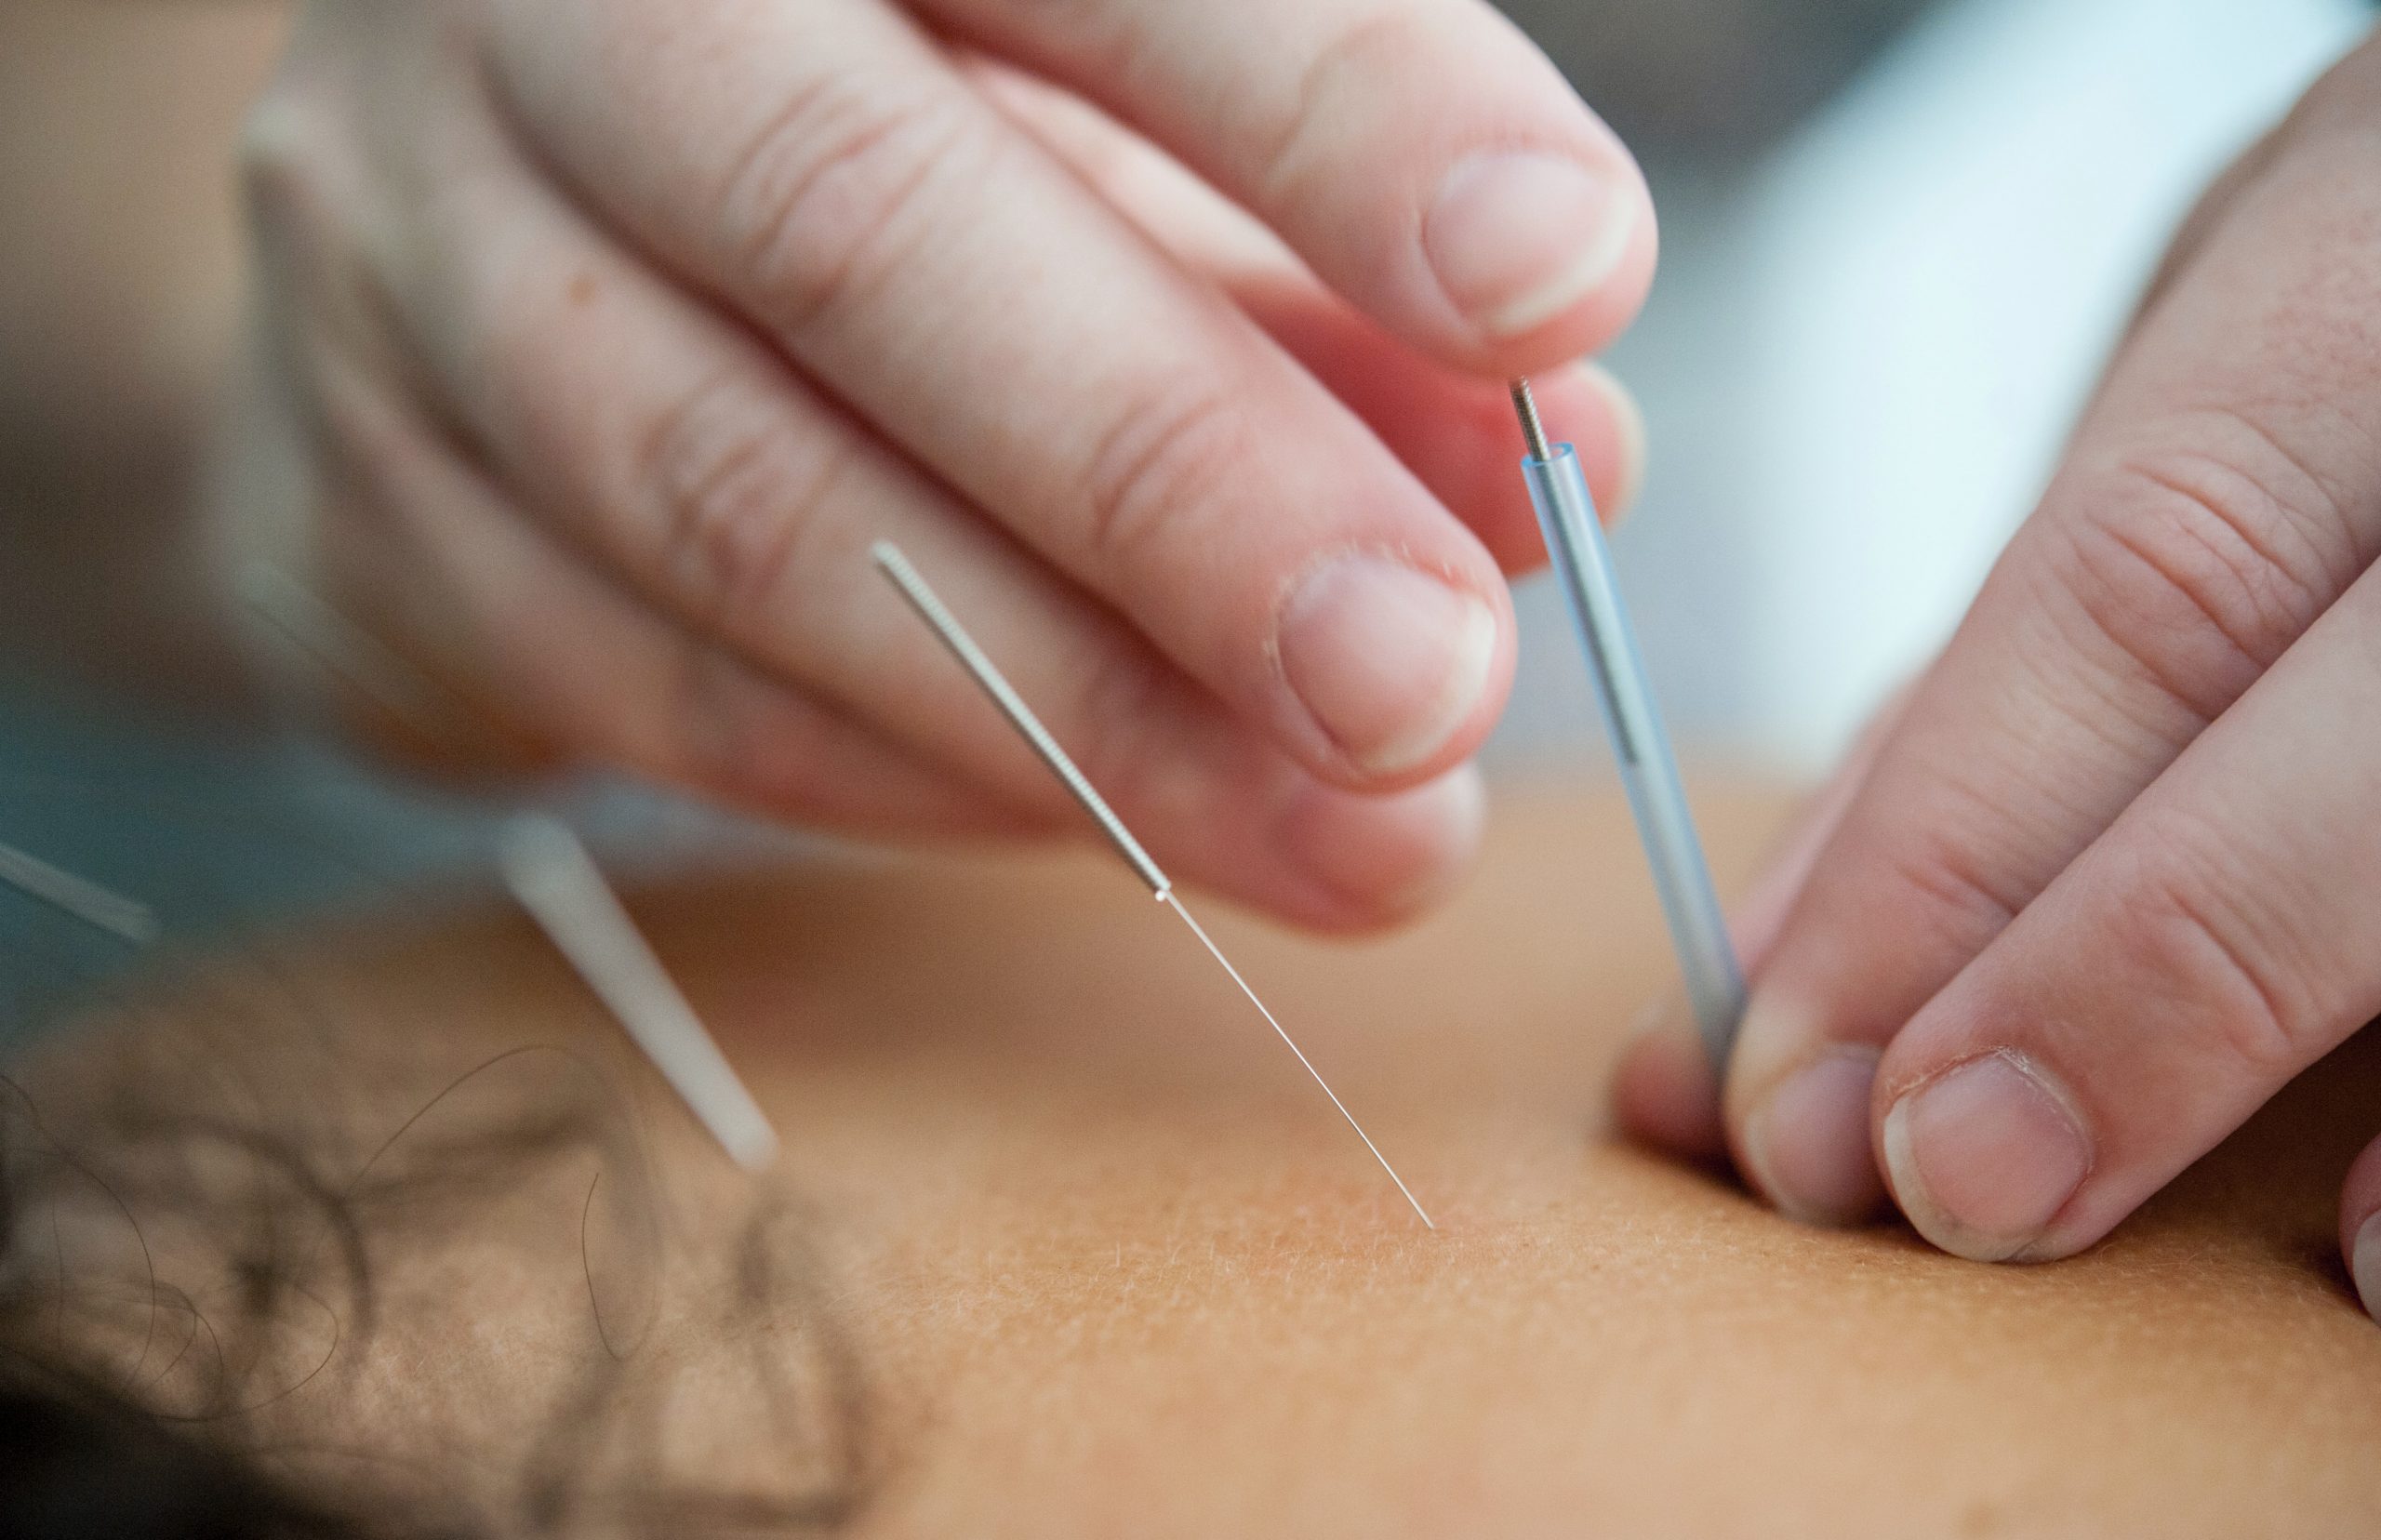 Sharon Campbell Acupuncture